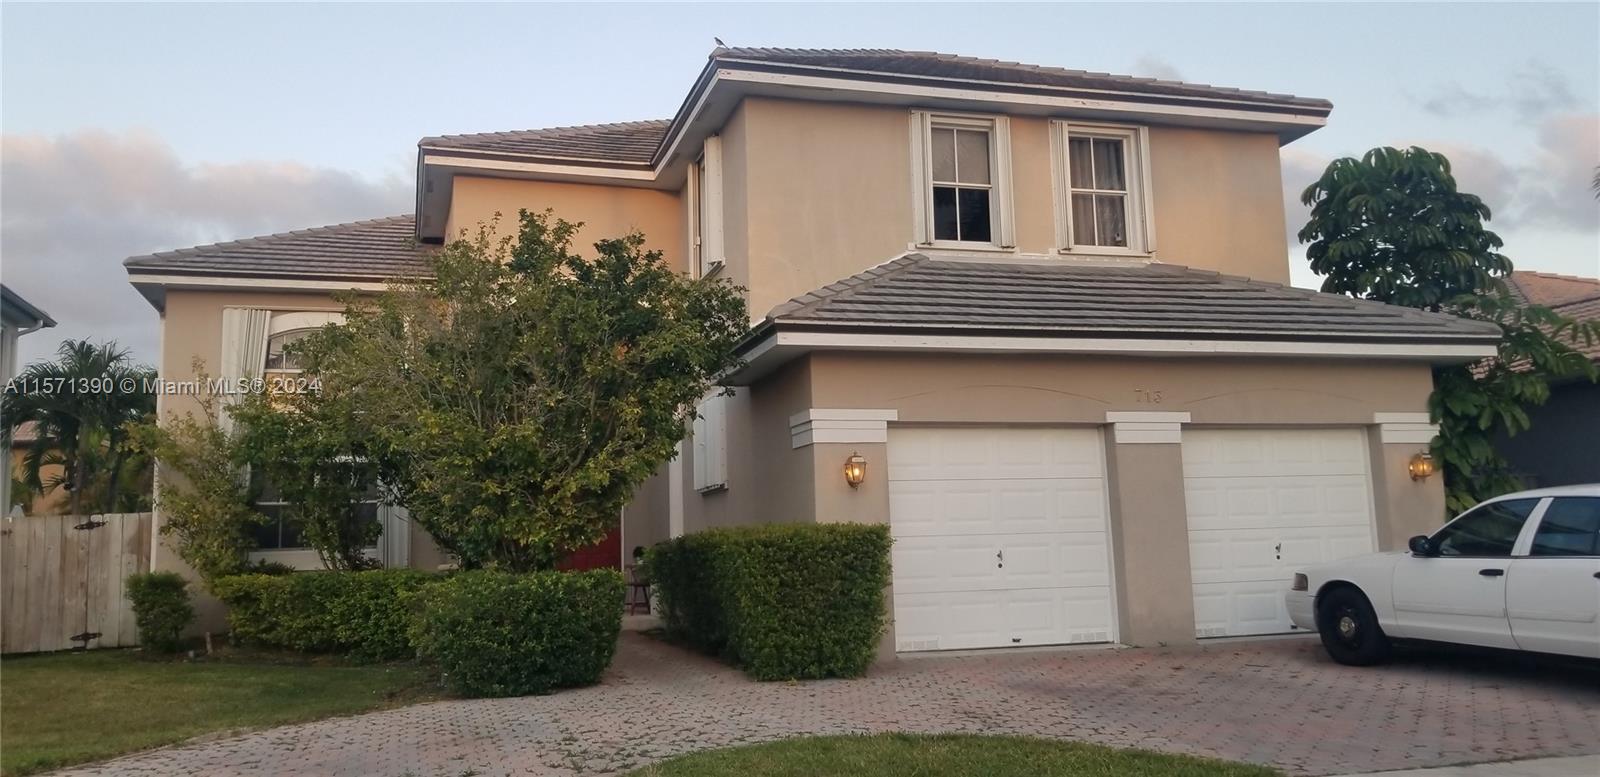 713 NW 129th Ct, Miami, Florida 33182, 4 Bedrooms Bedrooms, ,3 BathroomsBathrooms,Residential,For Sale,713 NW 129th Ct,A11571390